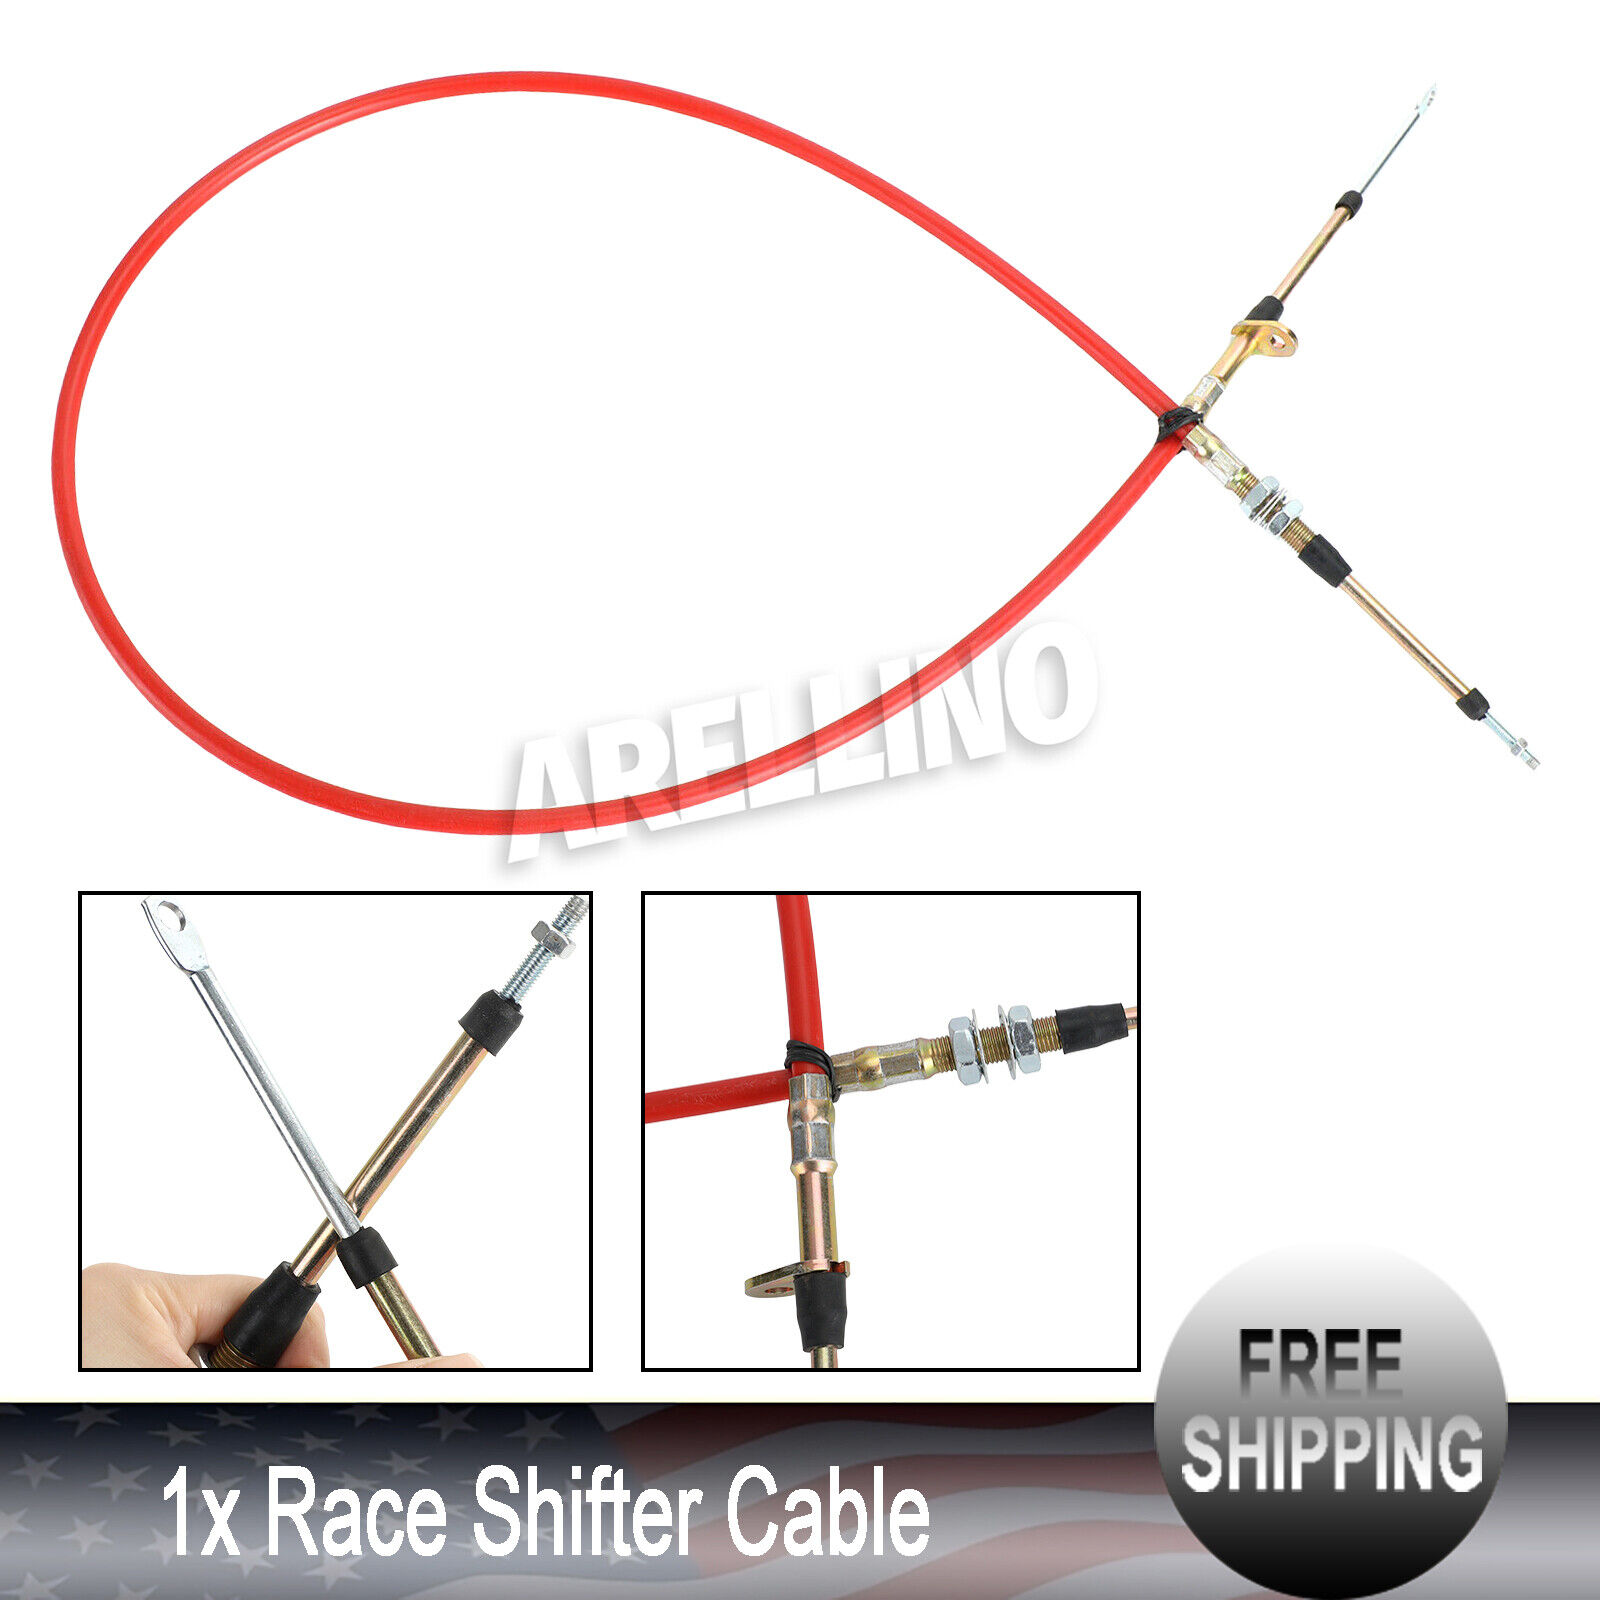 5 FT. Race Shift Cable B&M Shifters AF72-1002 For Race Shifter Cable Suit Most